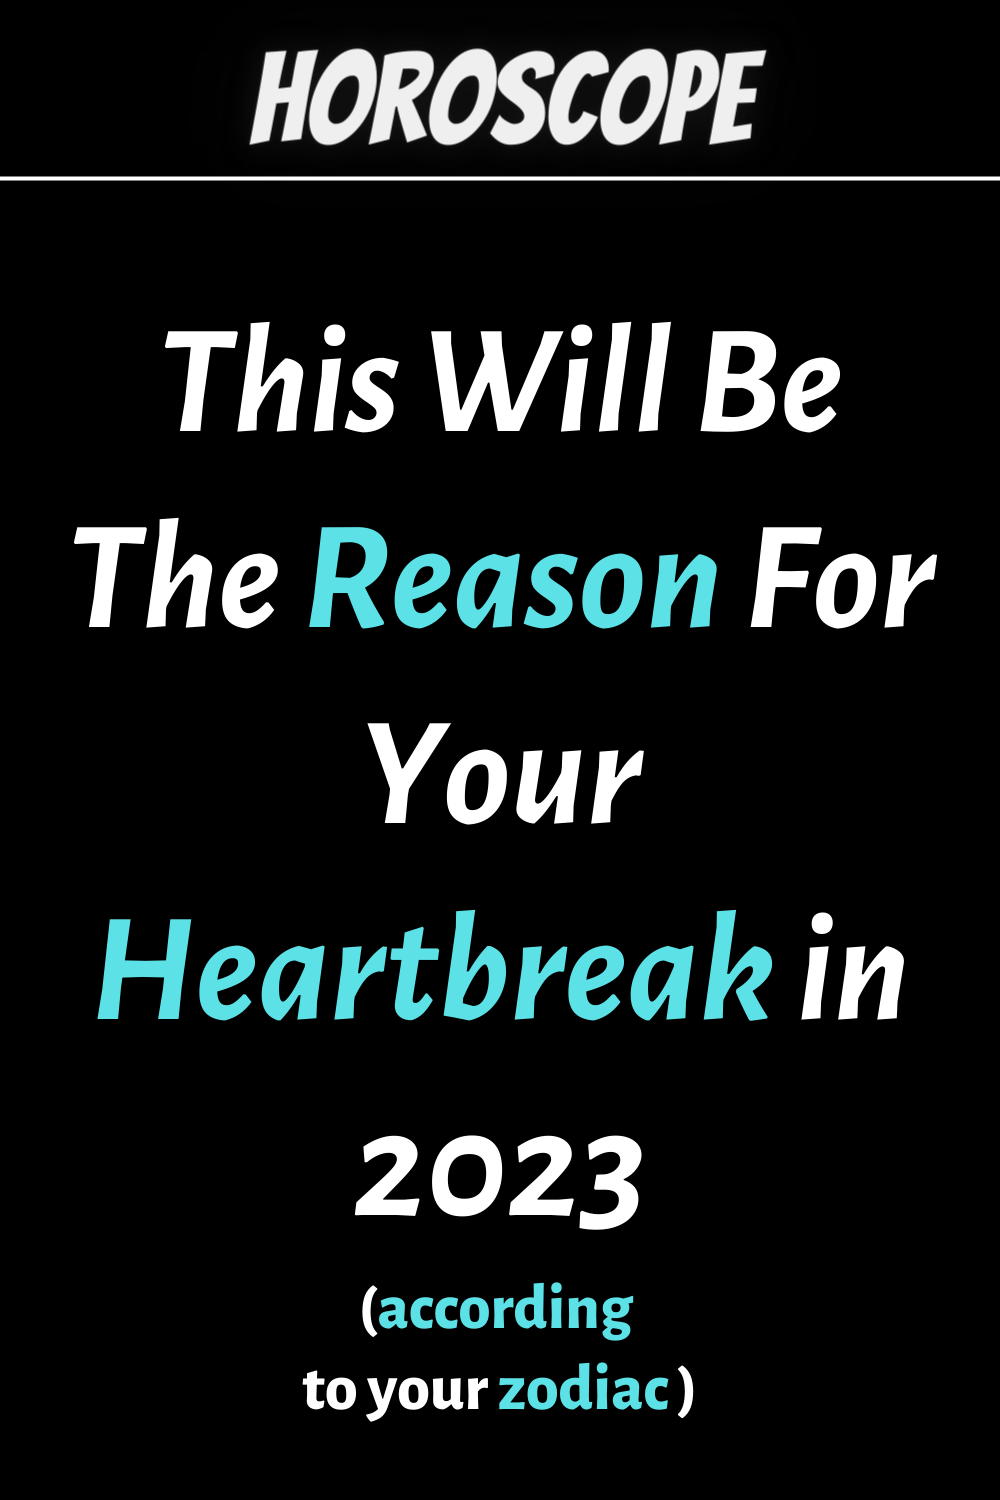 This Will Be The Reason For Your Heartbreak in 2023, Based On Your Zodiac